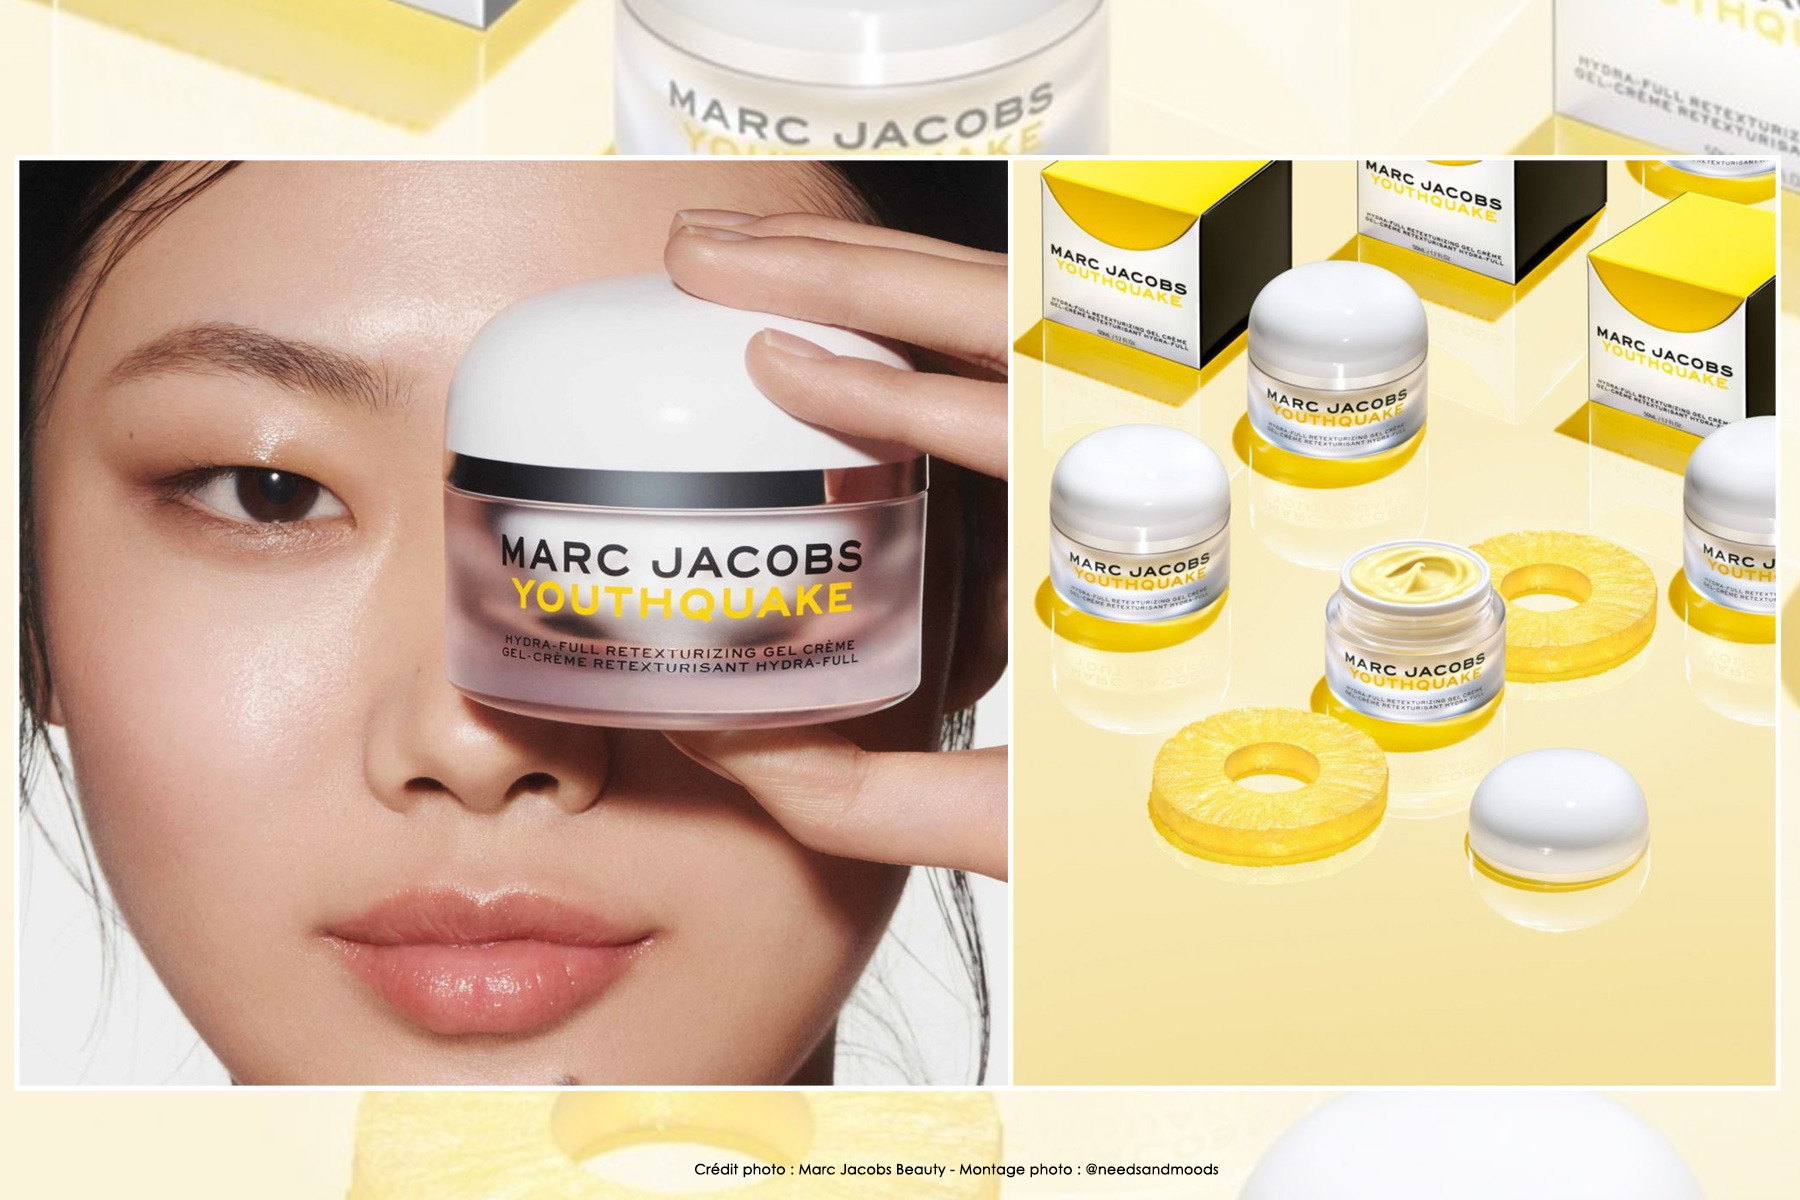 marc jacobs youthquake